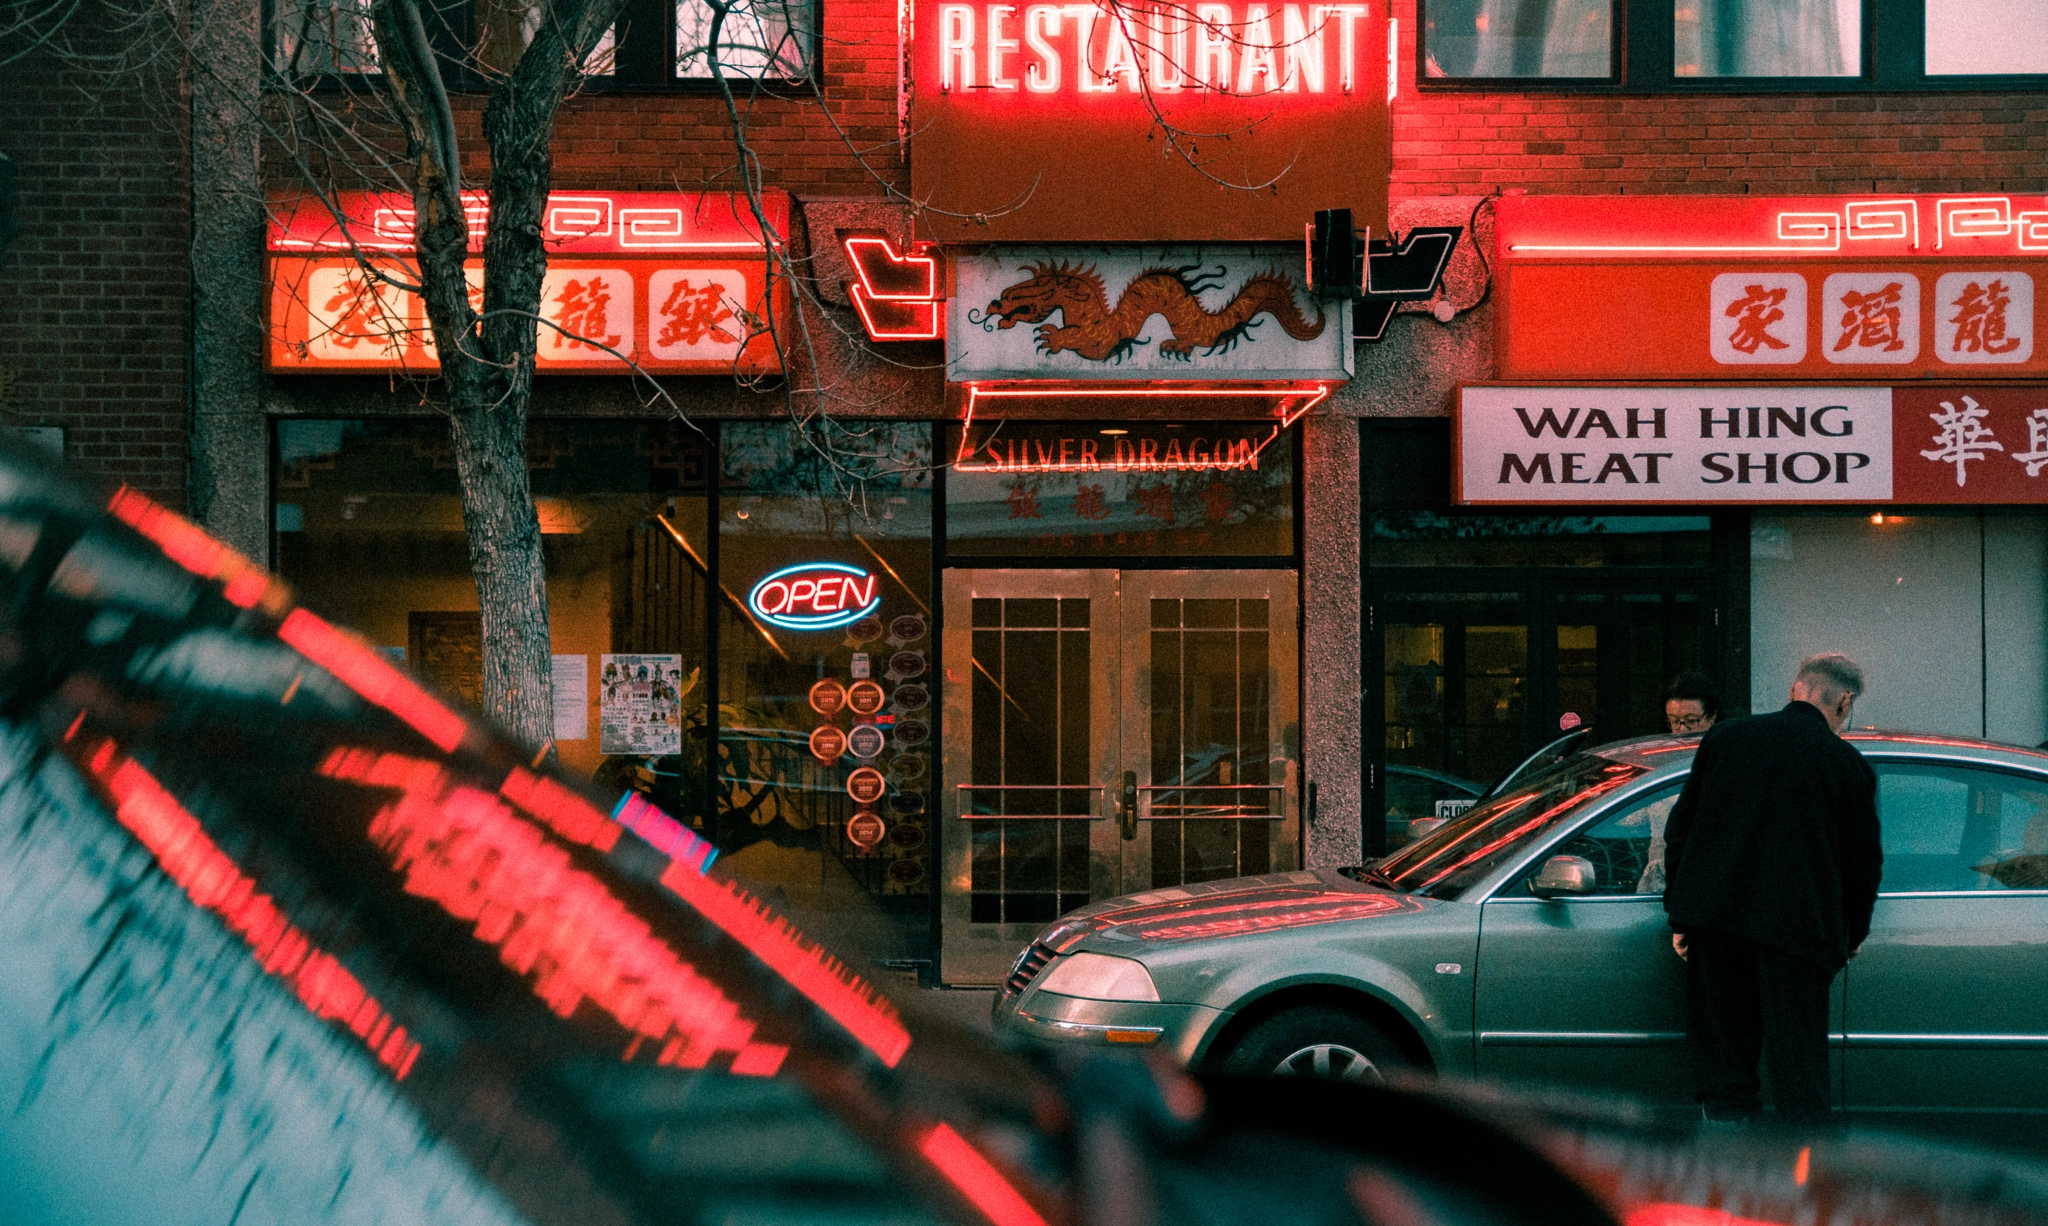 Sony a6300 sample photo. China town yyc photography